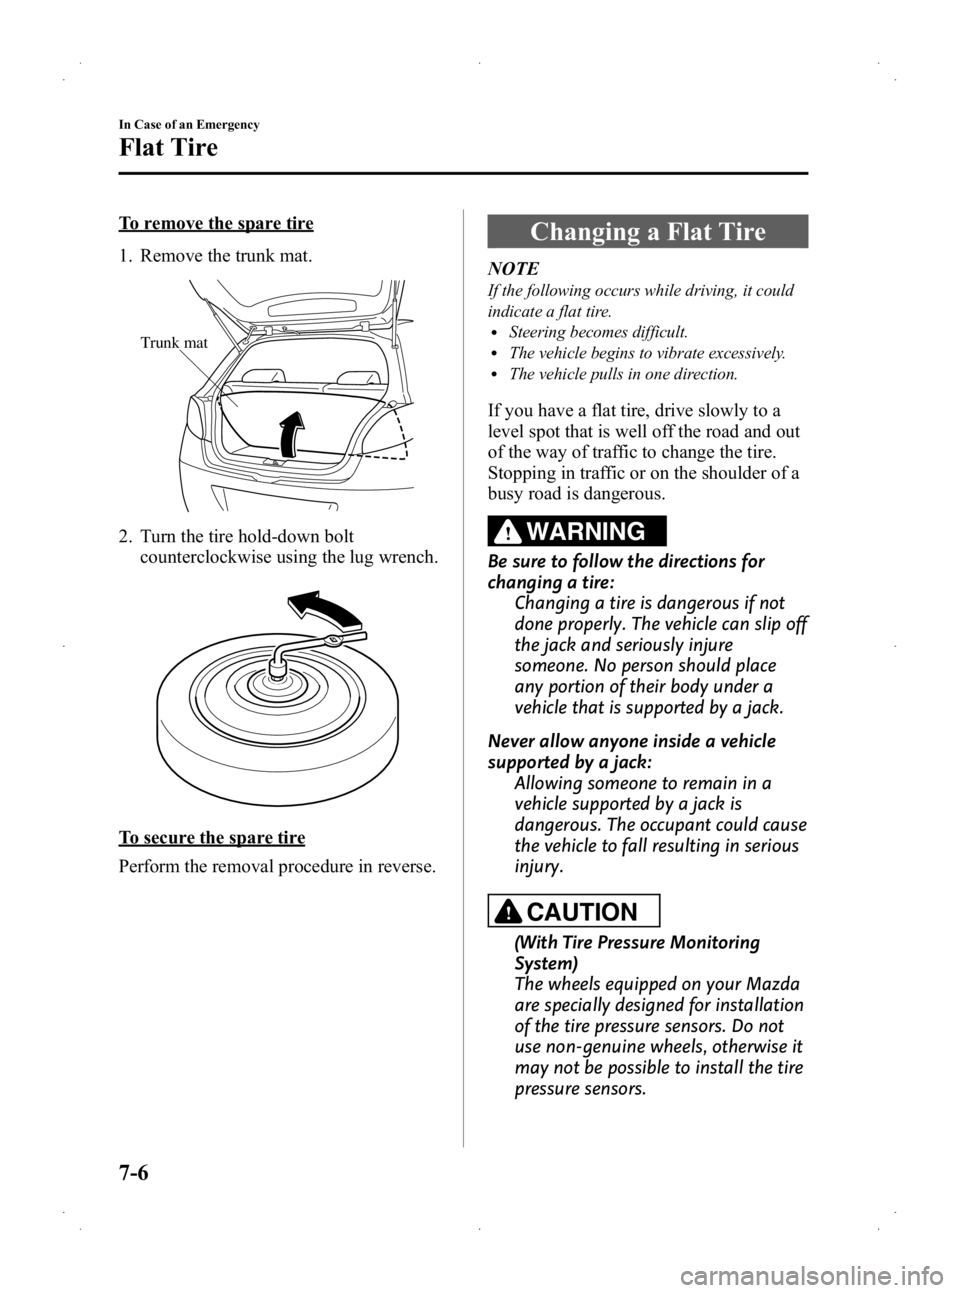 MAZDA MODEL 2 2013  Owners Manual Black plate (226,1)
To remove the spare tire
1. Remove the trunk mat.
Trunk mat
2. Turn the tire hold-down boltcounterclockwise using the lug wrench.
To secure the spare tire
Perform the removal proce